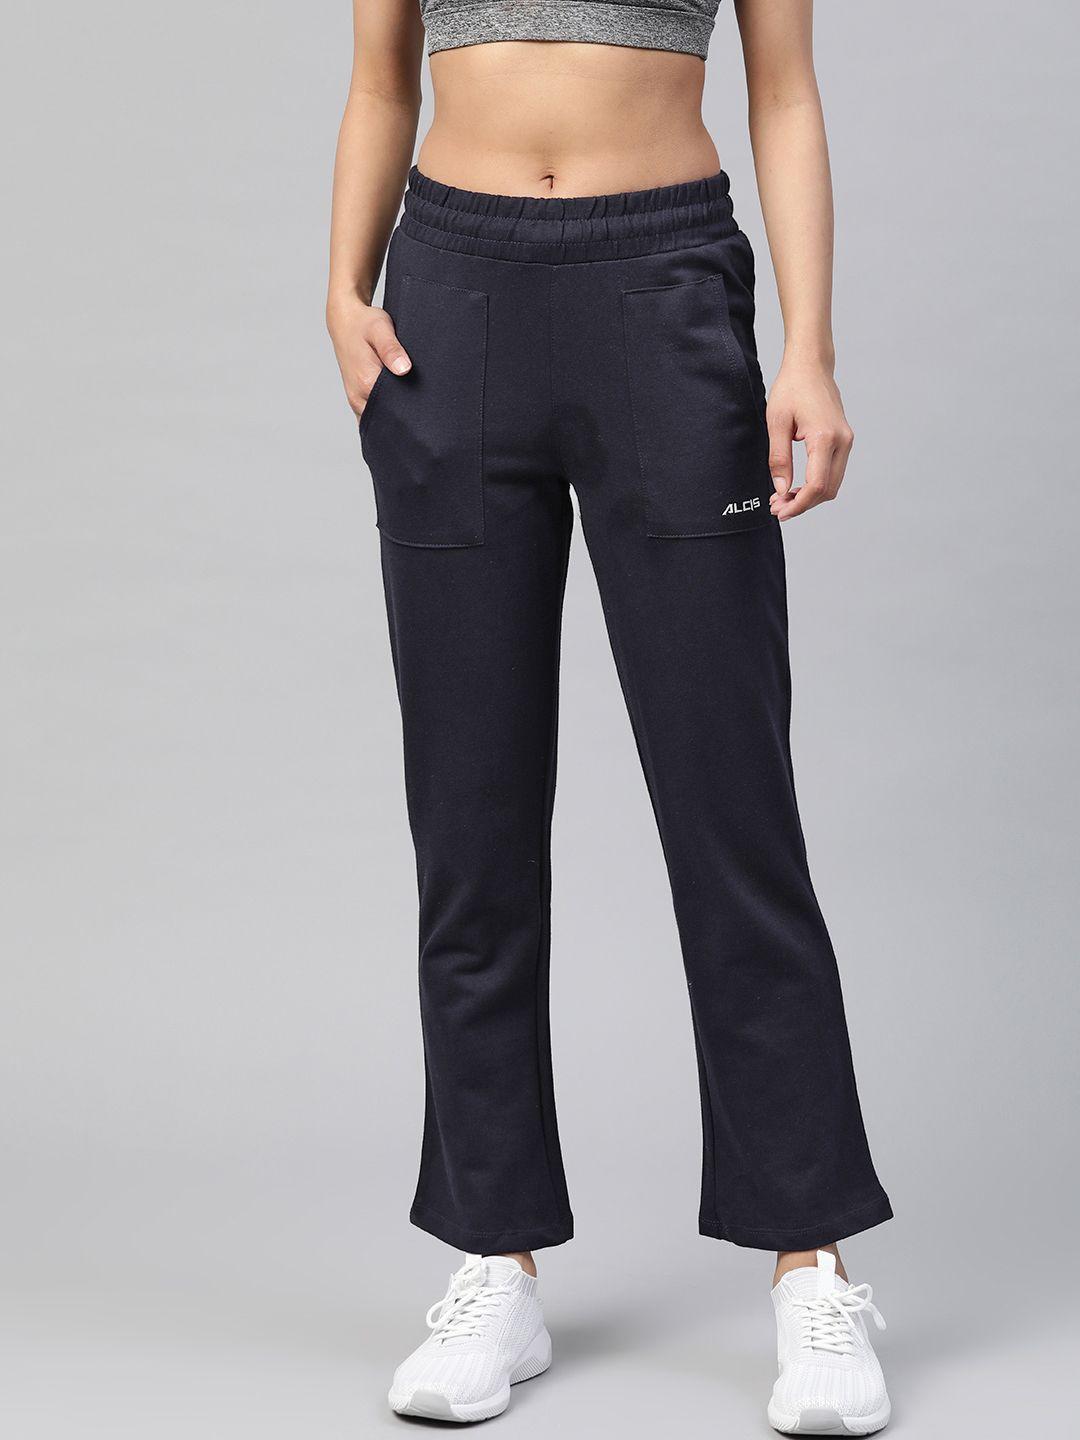 alcis-women-navy-blue-solid-track-pants